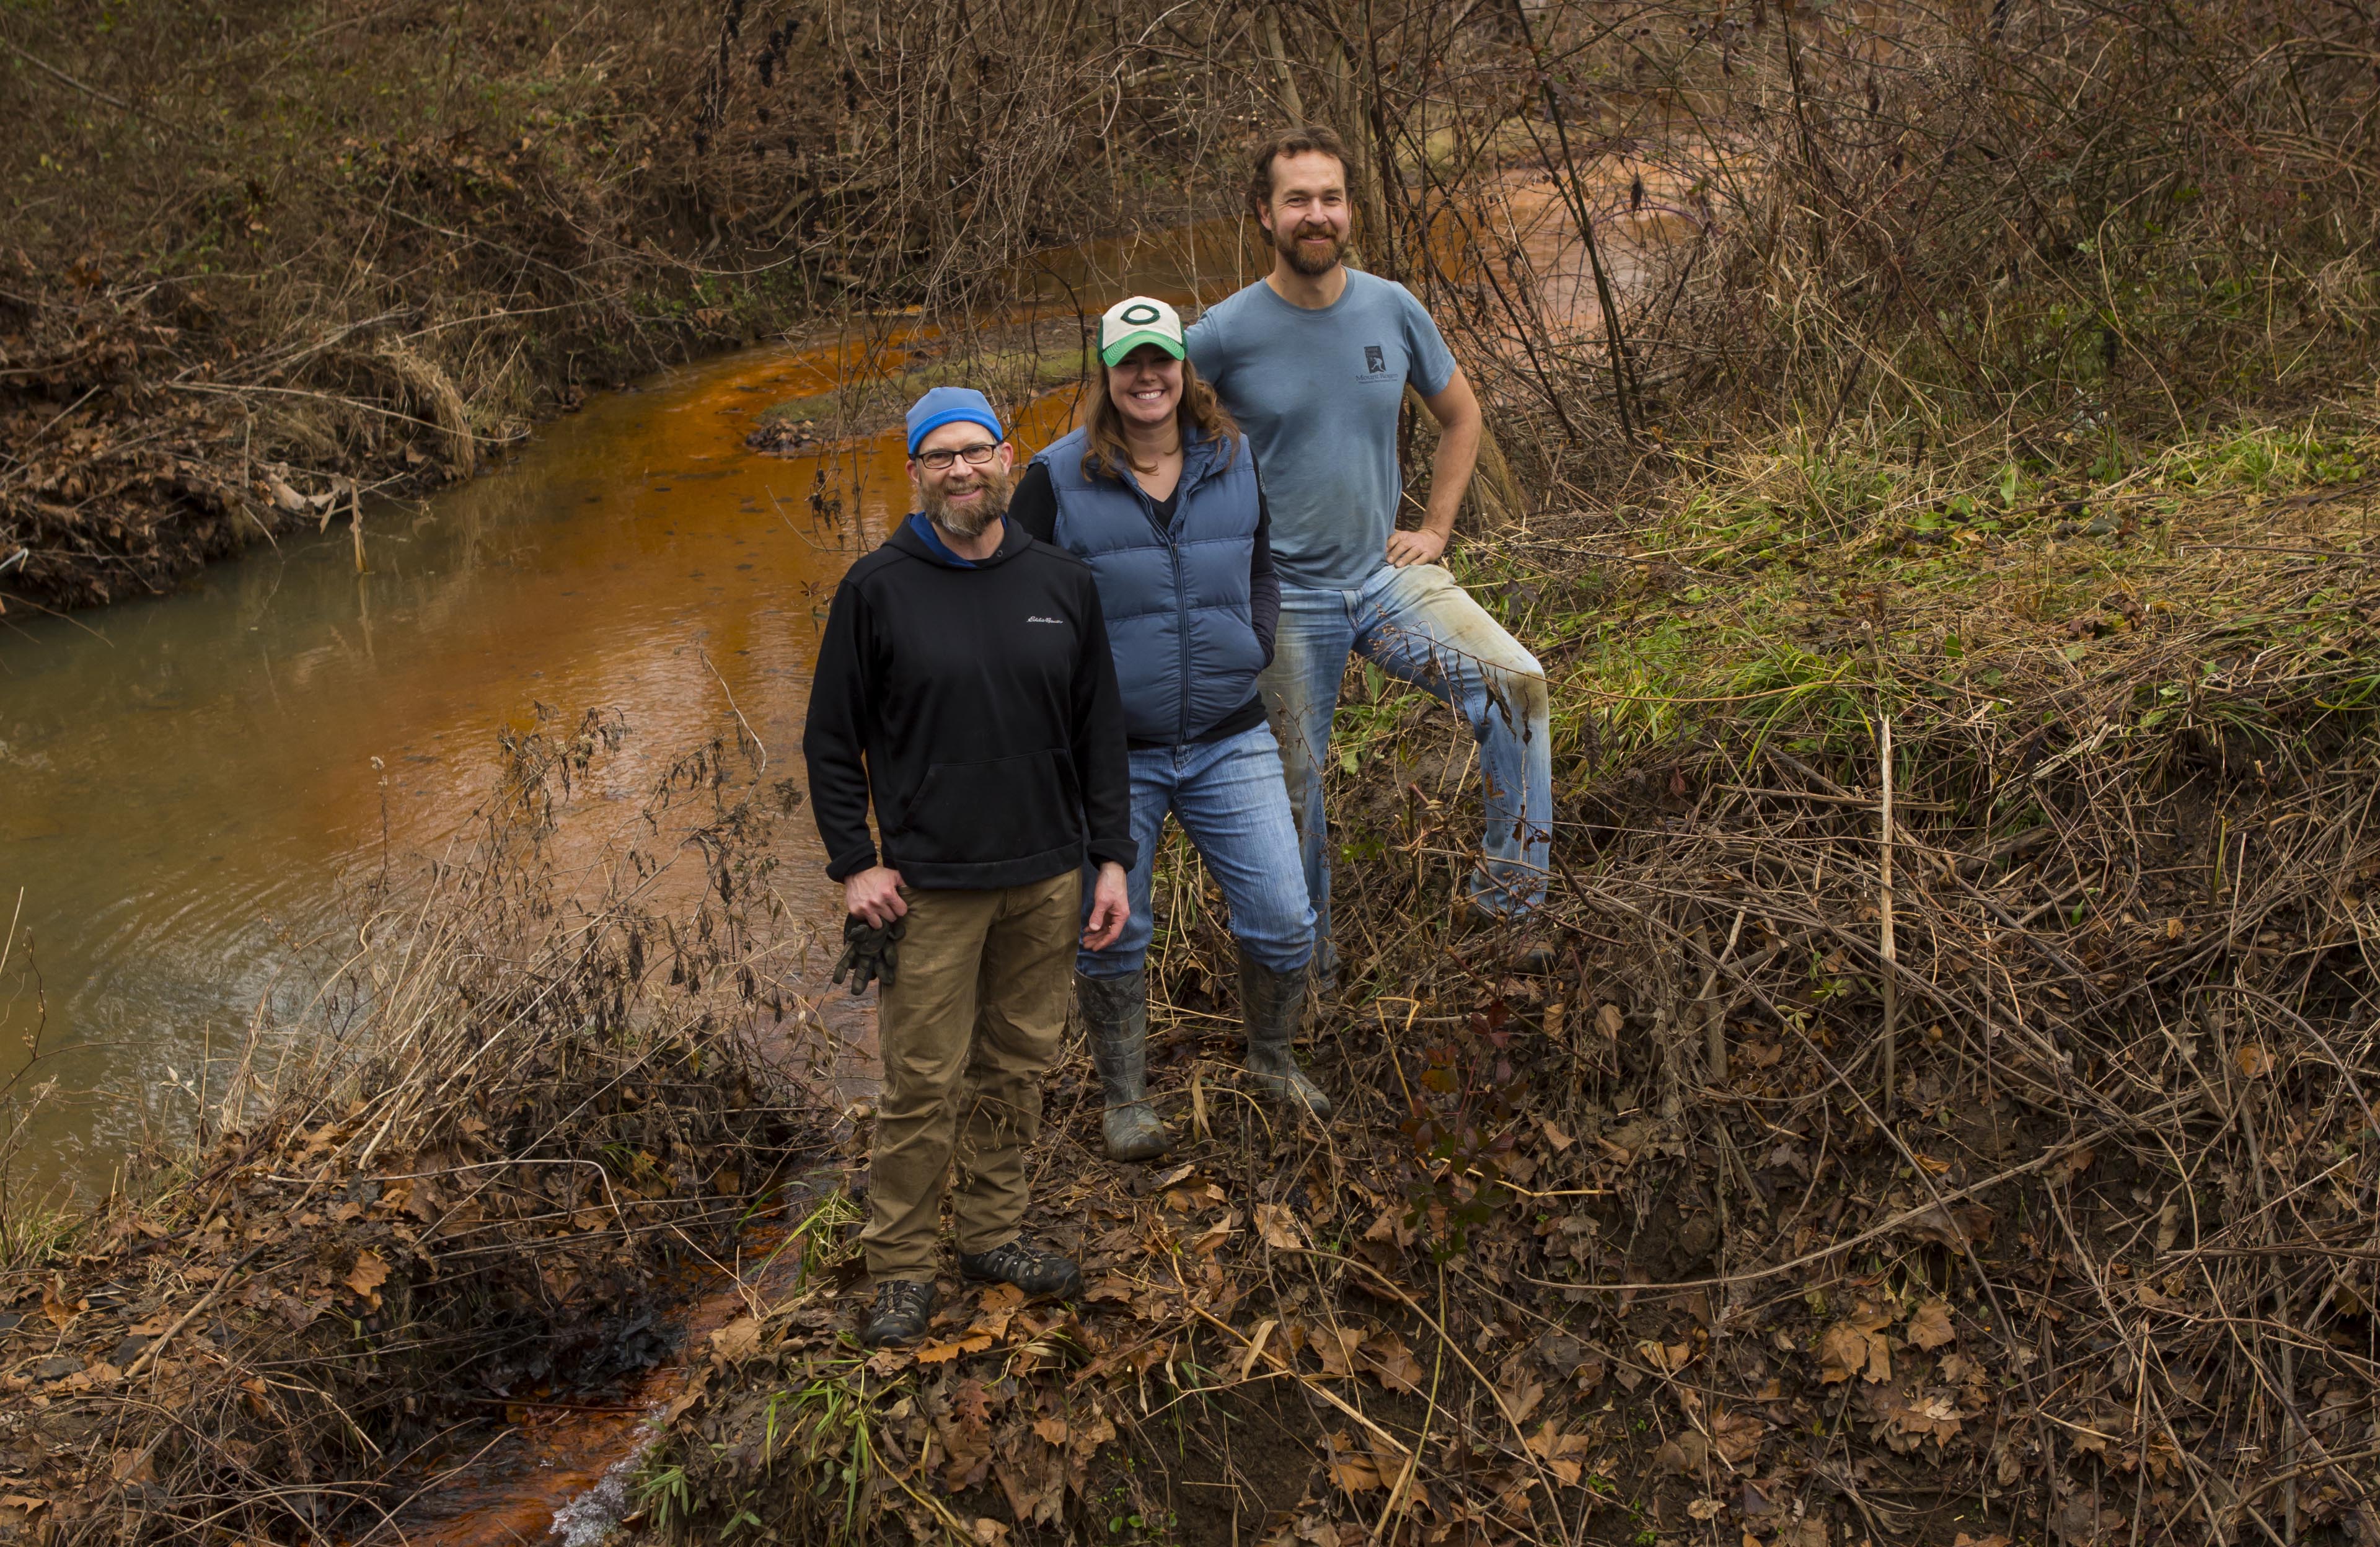 John Sabraw, Michelle Shively, and Guy Riefler pose with a creek behind them.